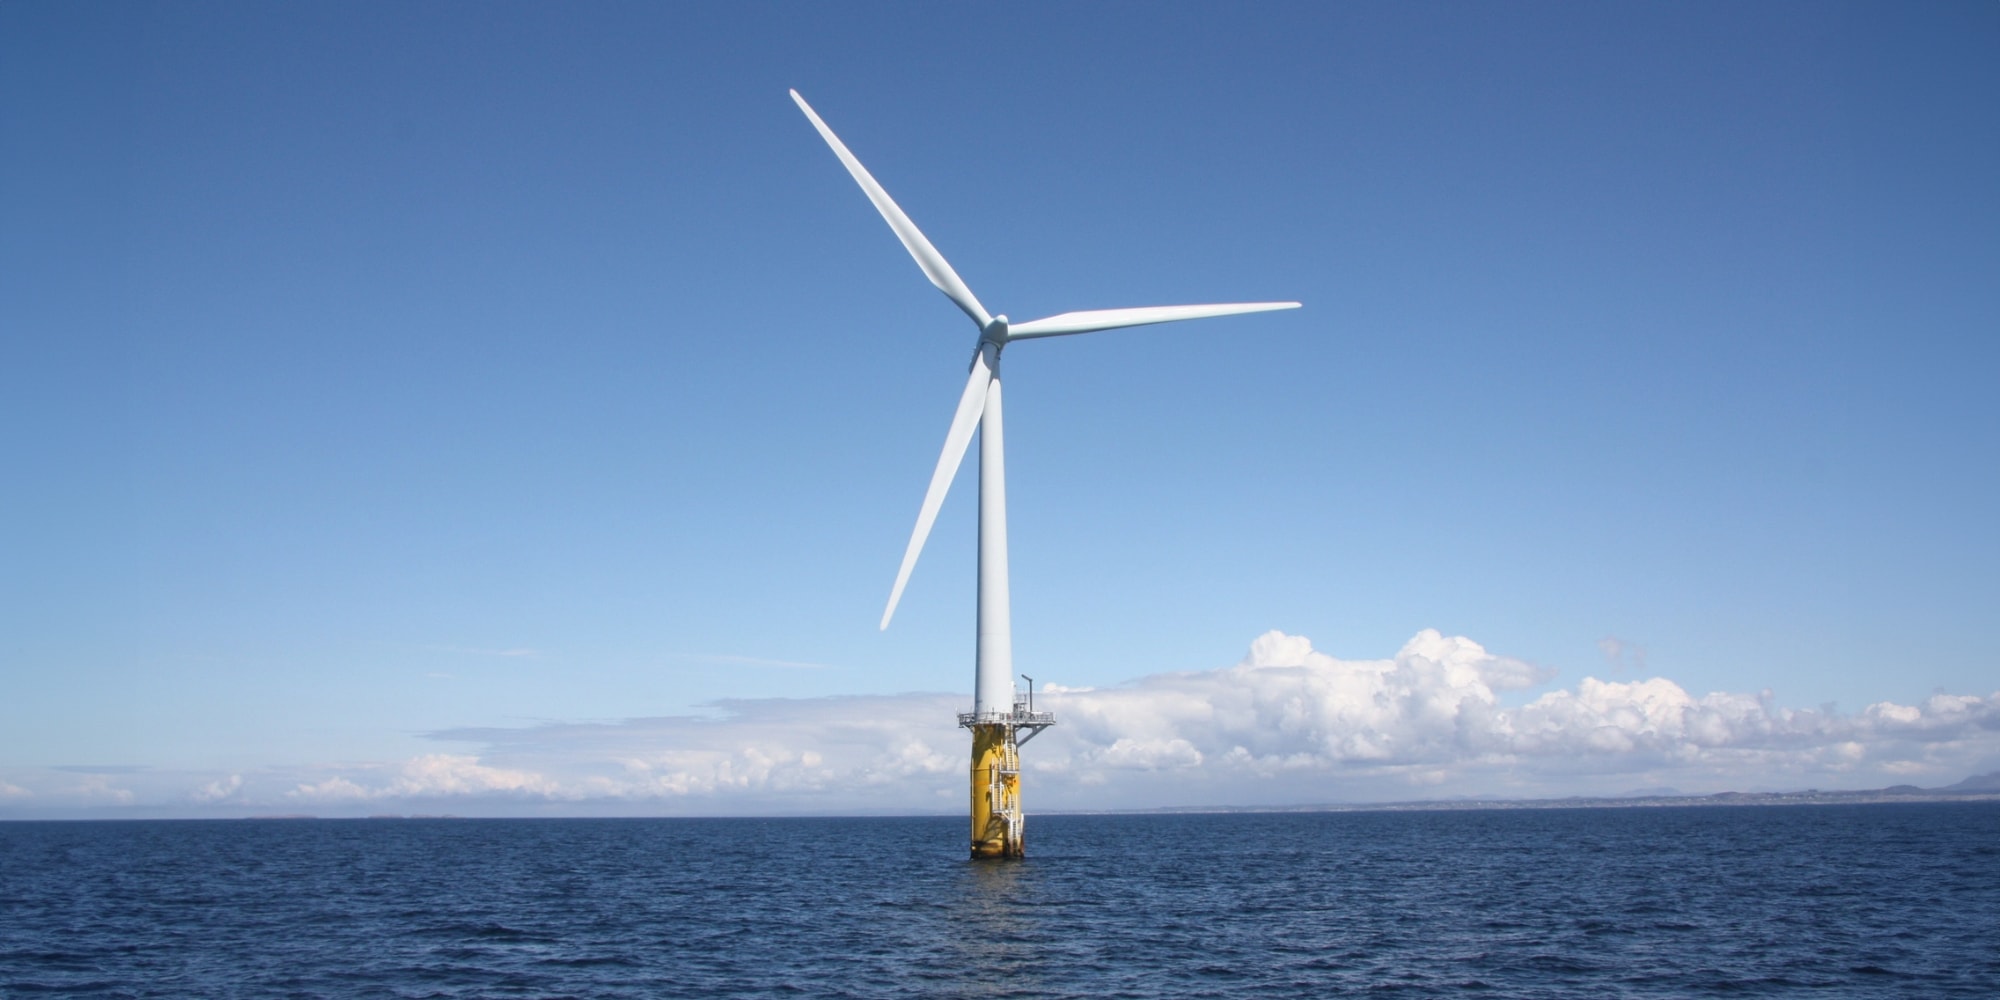 The US just proposed 18 GW of new offshore wind sales